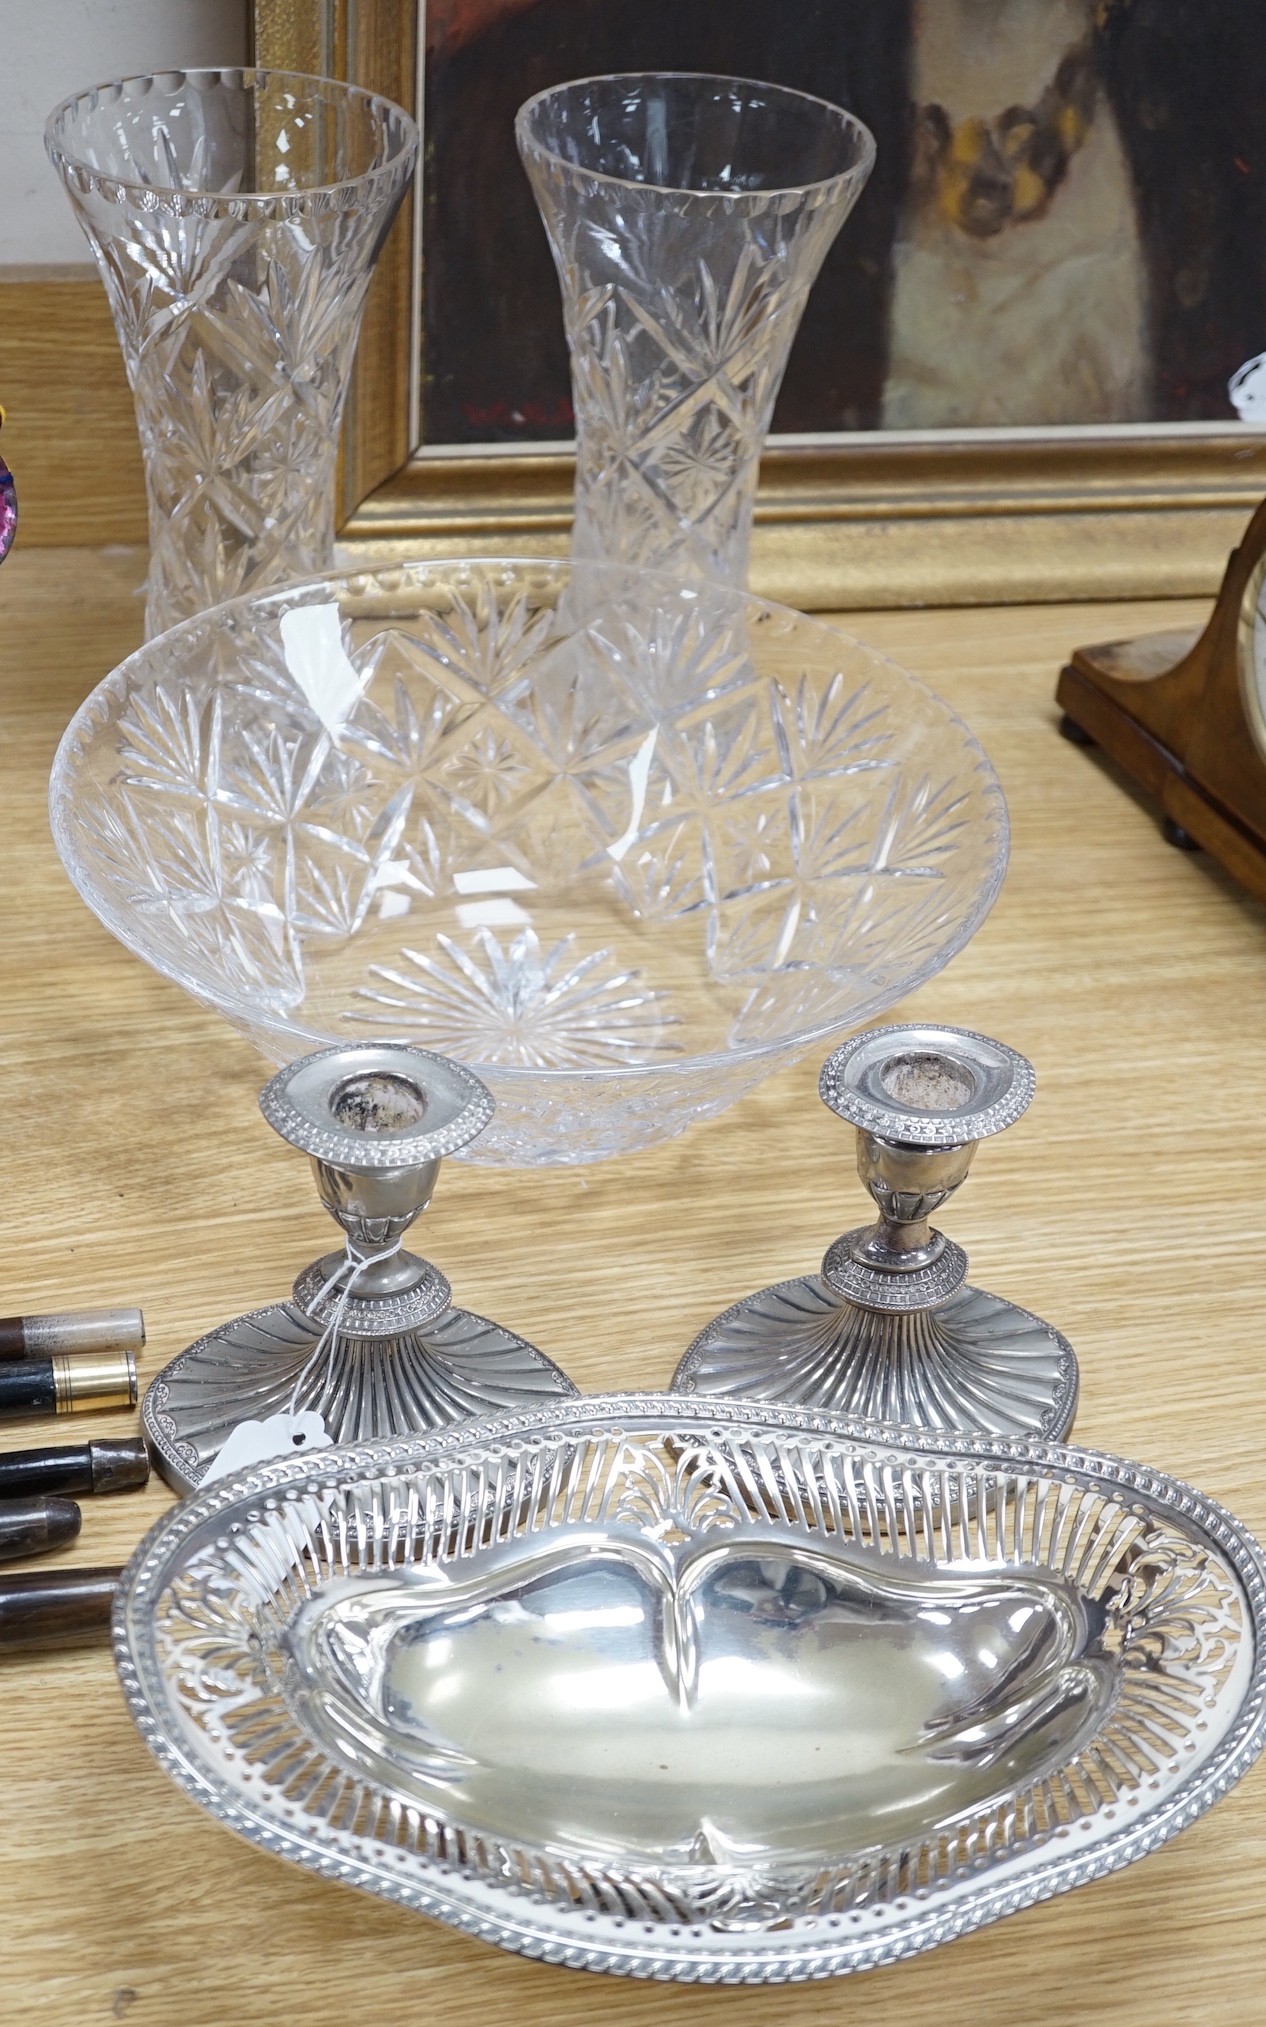 A pair of Doulton cut glass vases and a bowl plus a pair of silver plated candlesticks and a dish, vases 25cms high